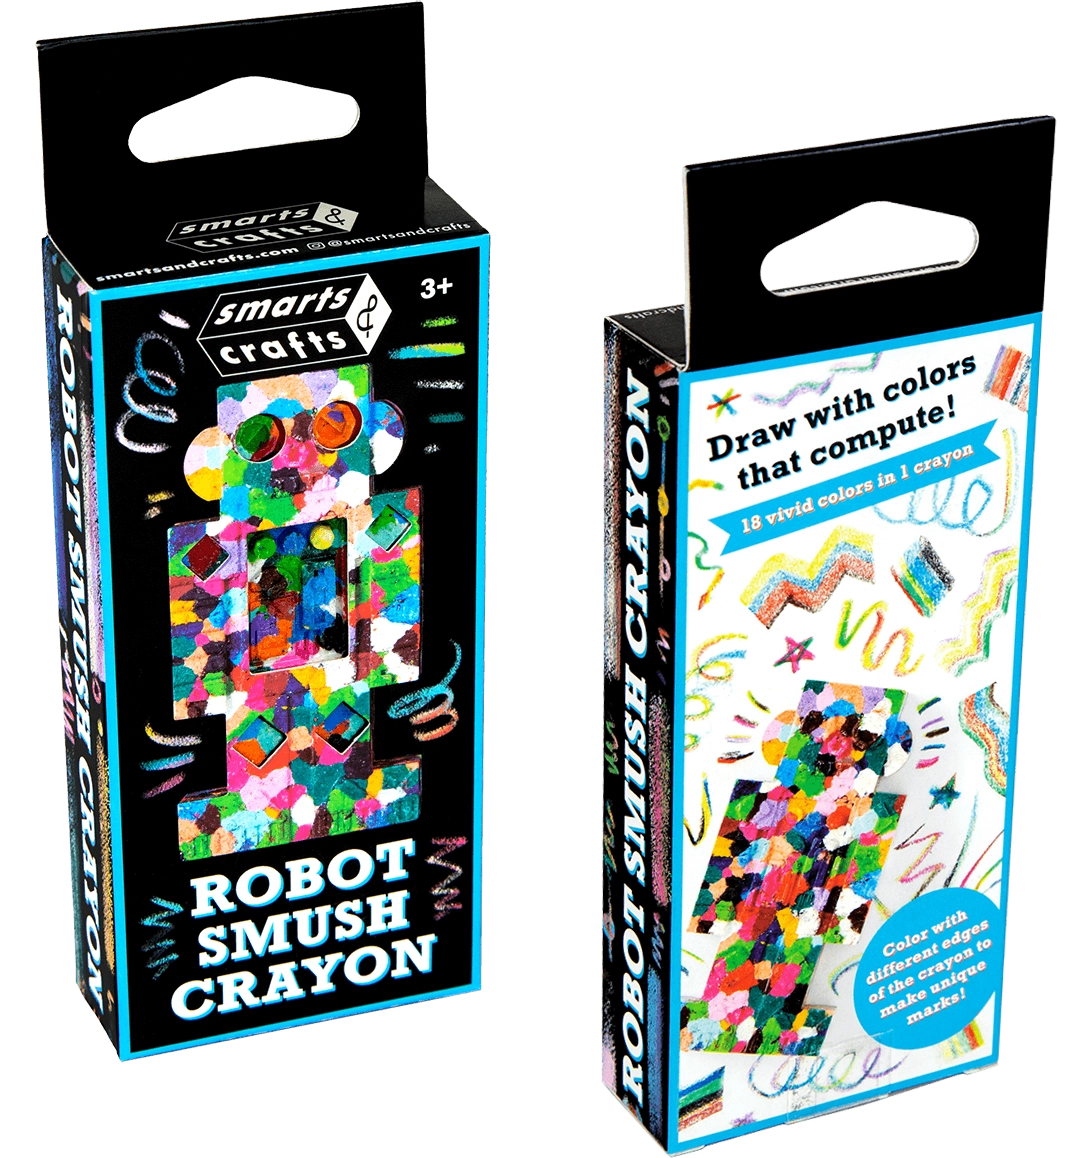 A front and back view of the Robot Crayon's packaging.